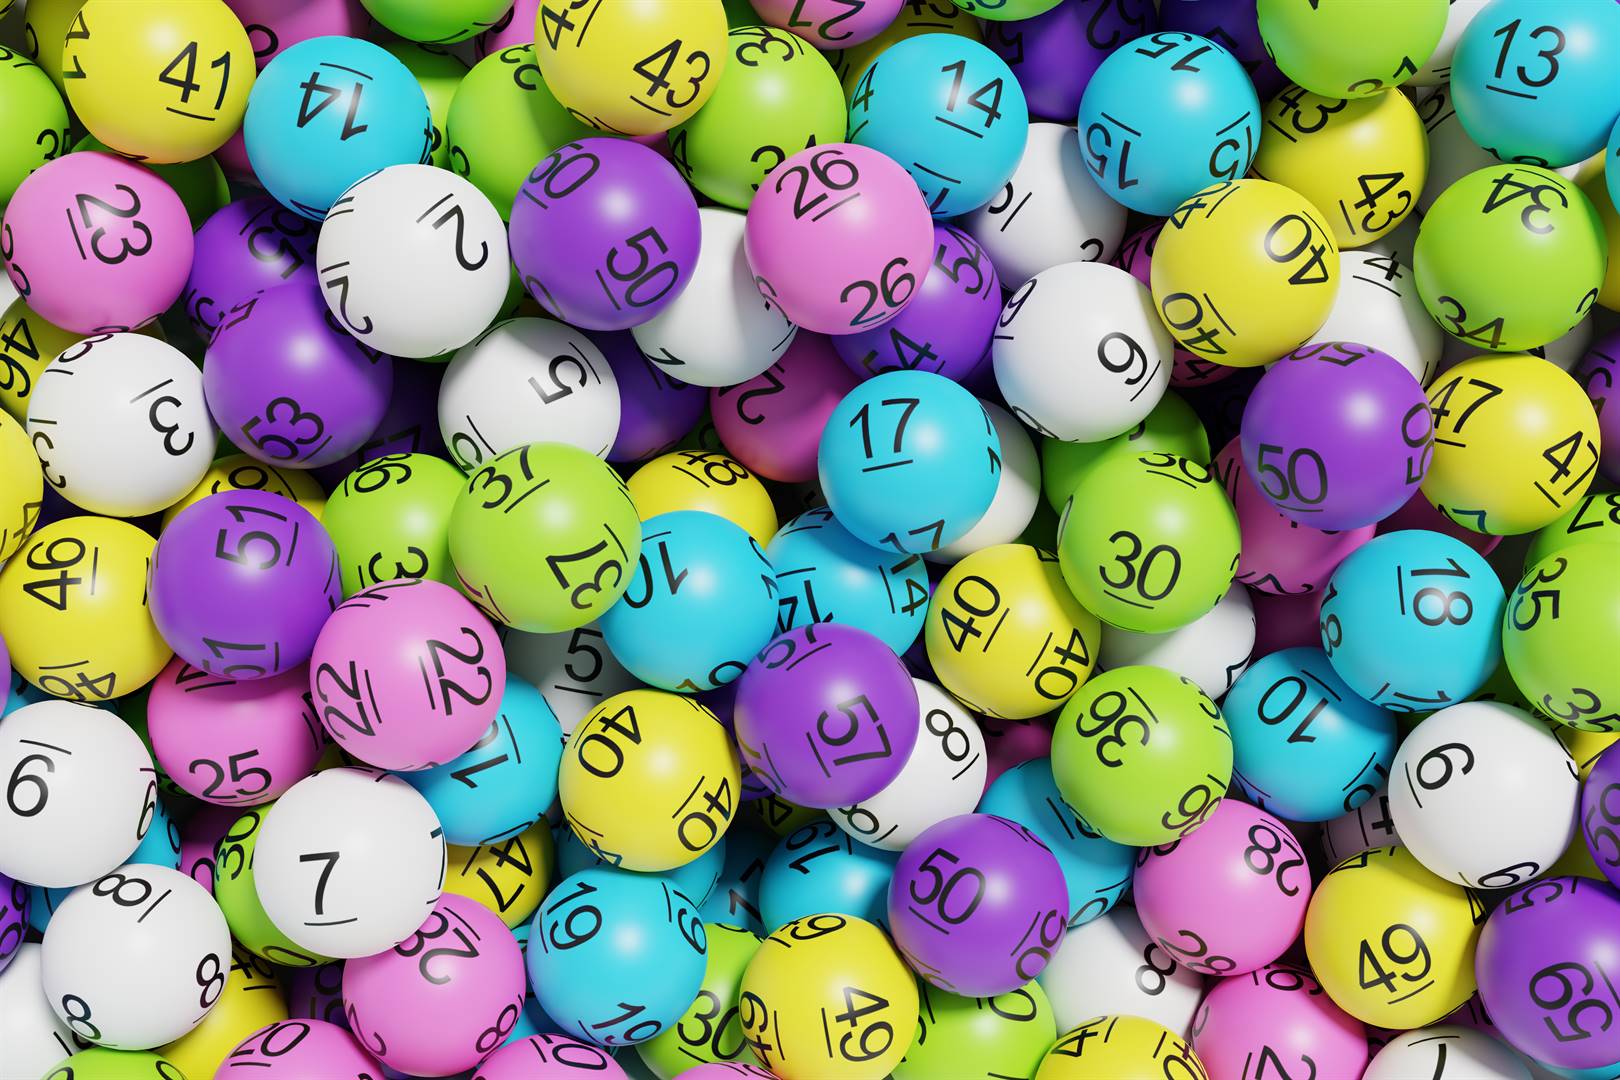 A Mbombela man who works in the security sector has claimed R10 million in Lotto winnings. 